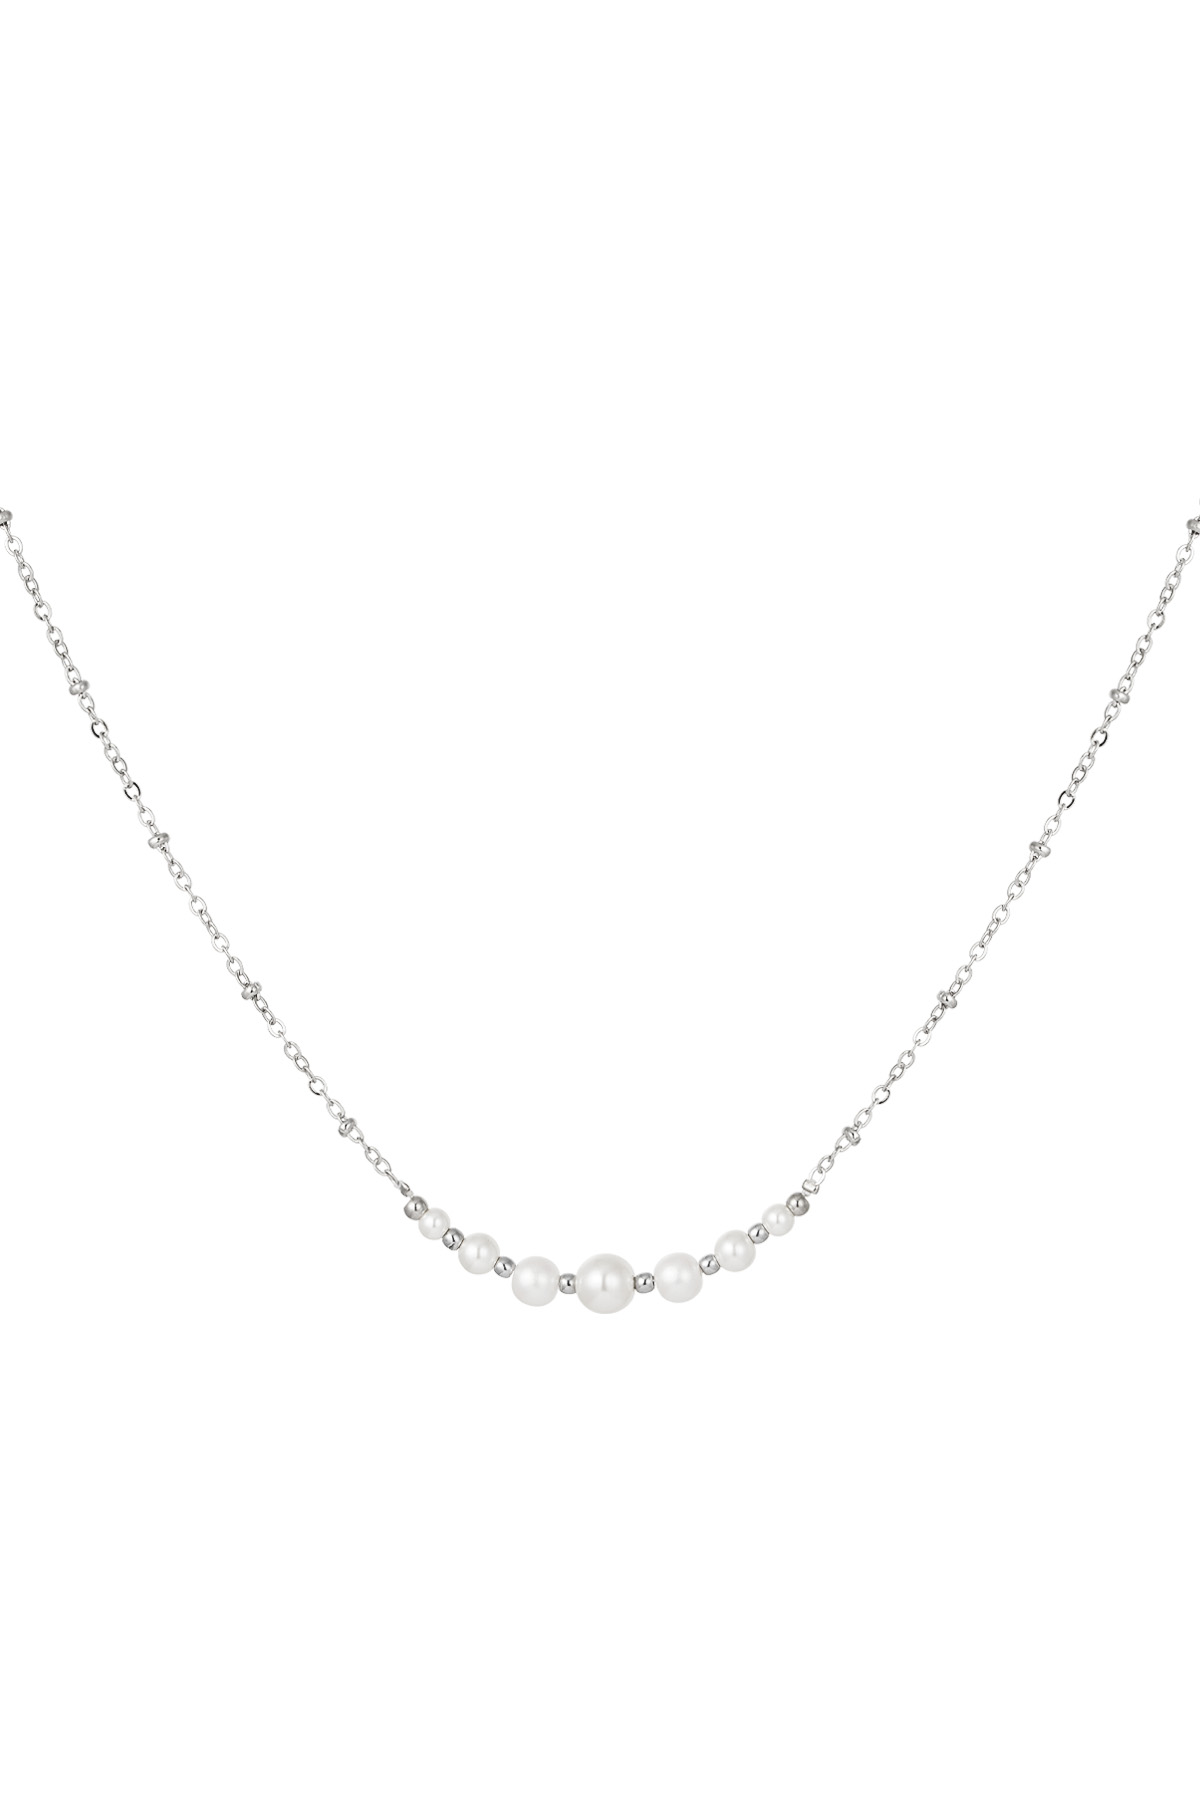 Necklace pearl party - silver h5 